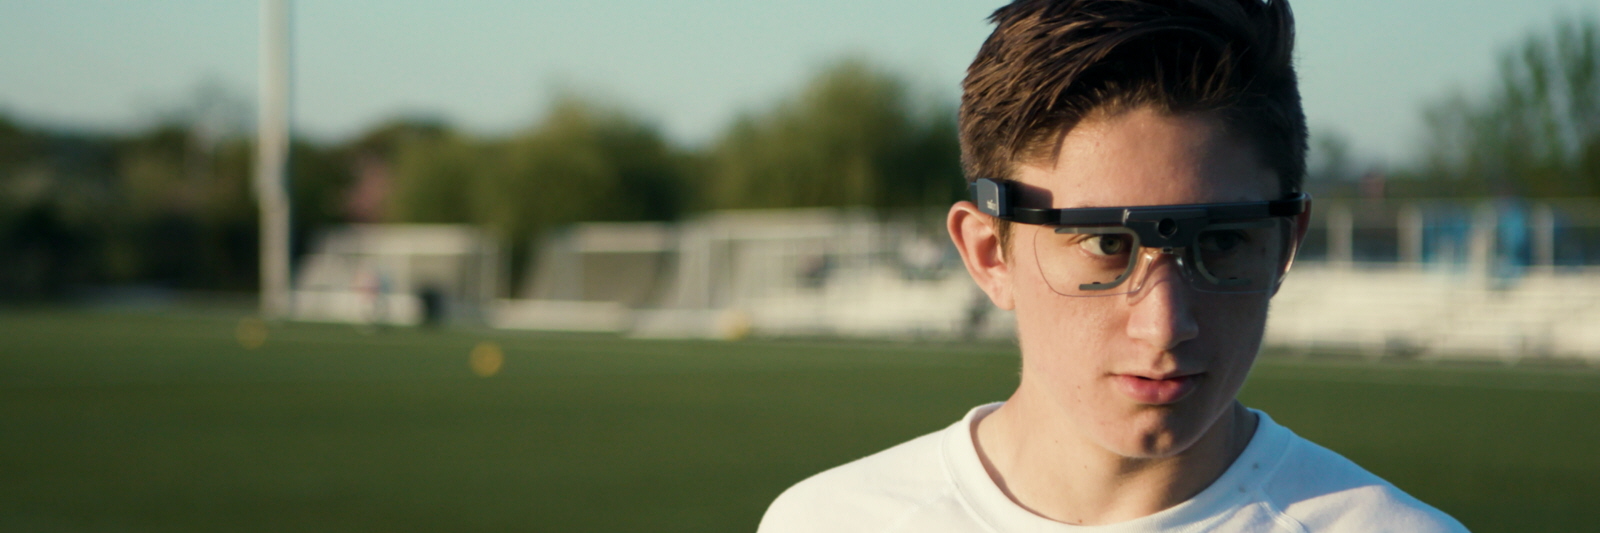 Tobii Pro Glasses 2 used for professional football training and performance improvements